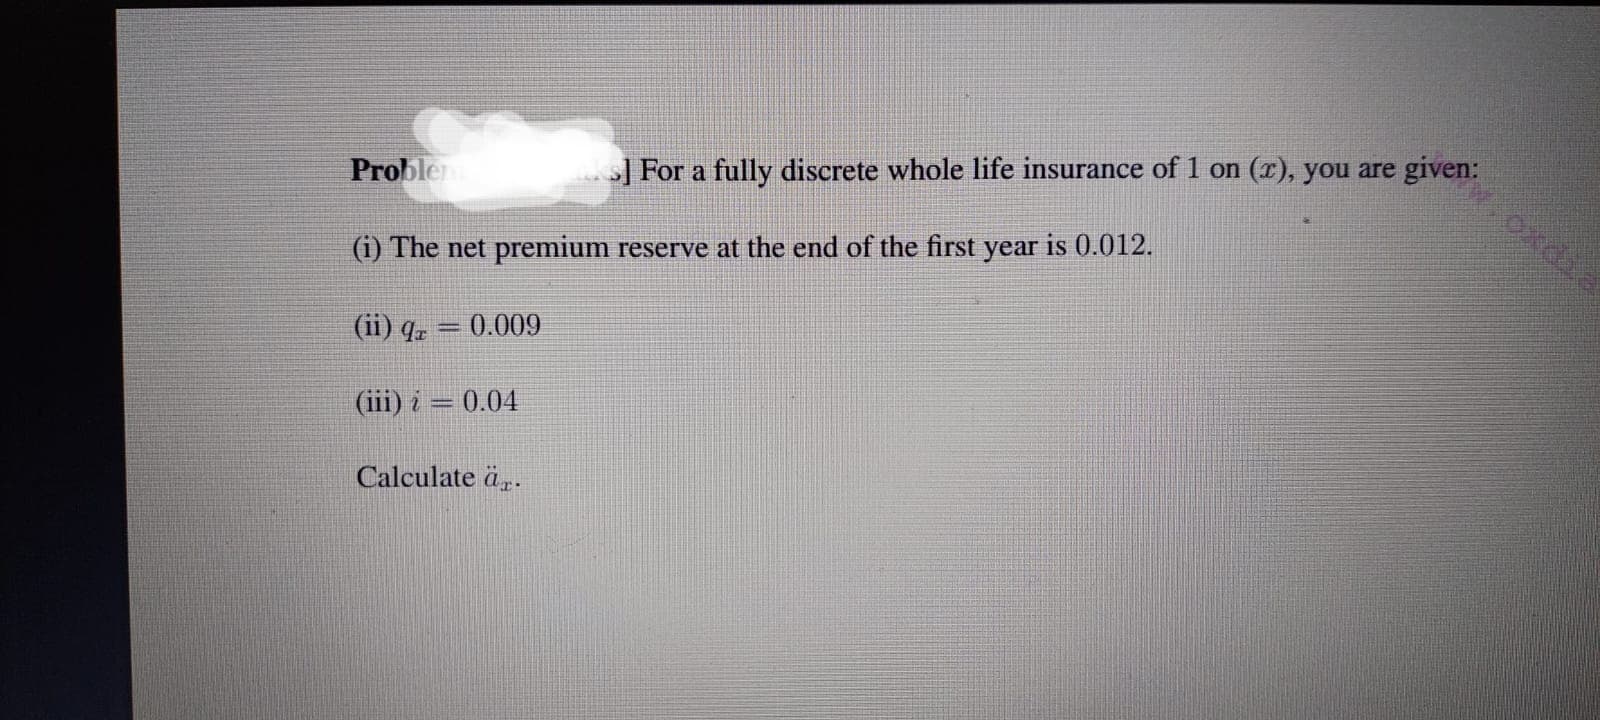 Problem
>] For a fully discrete whole life insurance of 1 on (r), you are given:
(i) The net premium reserve at the end of the first year is 0.012.
(ii) qz = 0.009
(iii) i = 0.04
Calculate är.